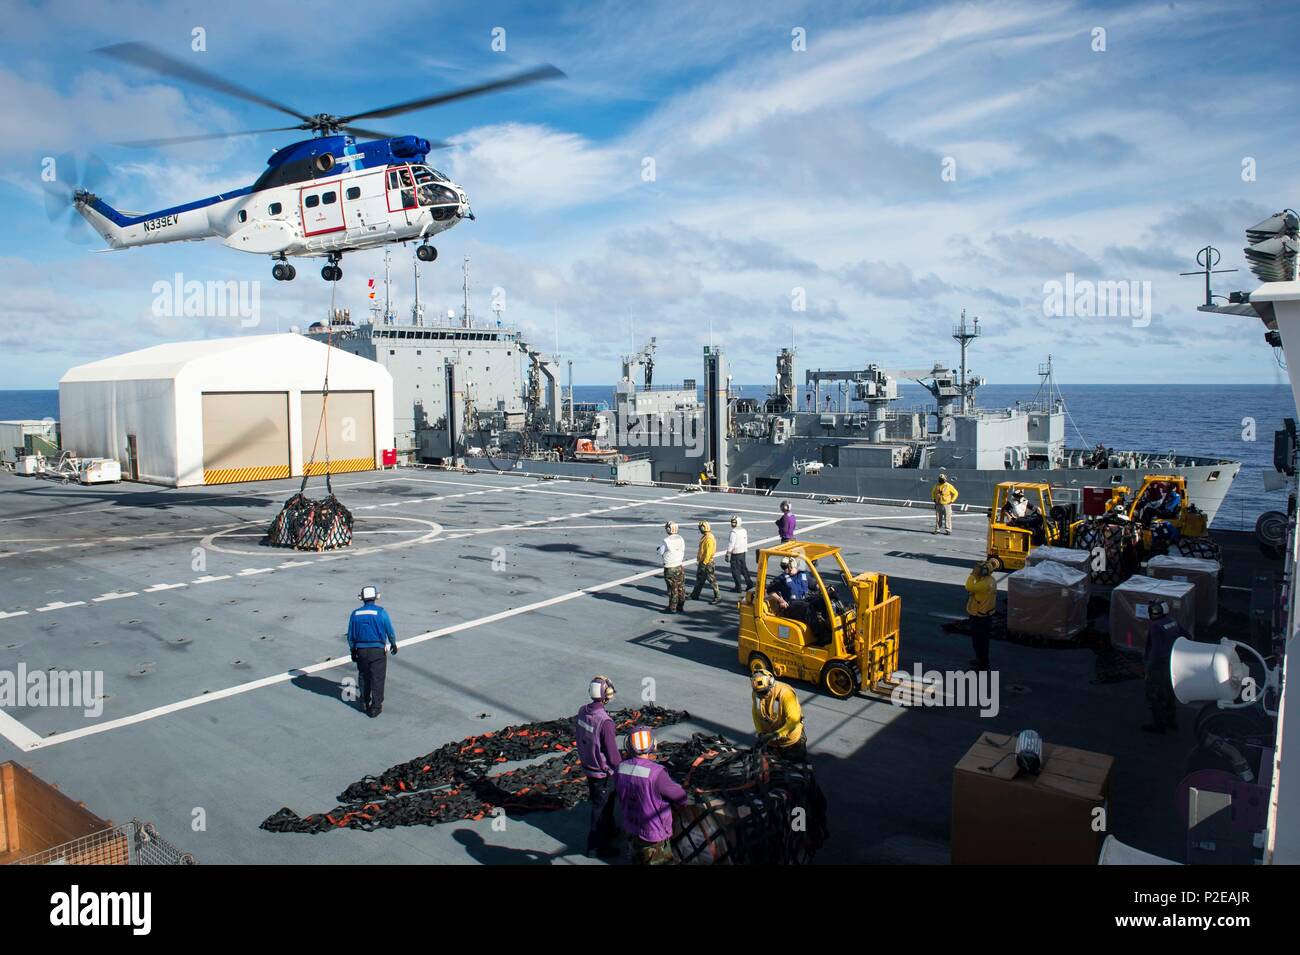 160910-N-QW941-146 PACIFIC OCEAN (Sept. 10, 2016) An SA-330J Puma helicopter assigned to dry cargo ship USNS Matthew Perry (T-AKE 9), delivers supplies to hospital ship USNS Mercy (T-AH 19), during a vertical replenishment. Deployed in support of Pacific Partnership 2016, Mercy is sailing to her homeport of San Diego. (U.S. Navy photo by Mass Communication Specialist 3rd Class Trevor Kohlrus/Released) Stock Photo